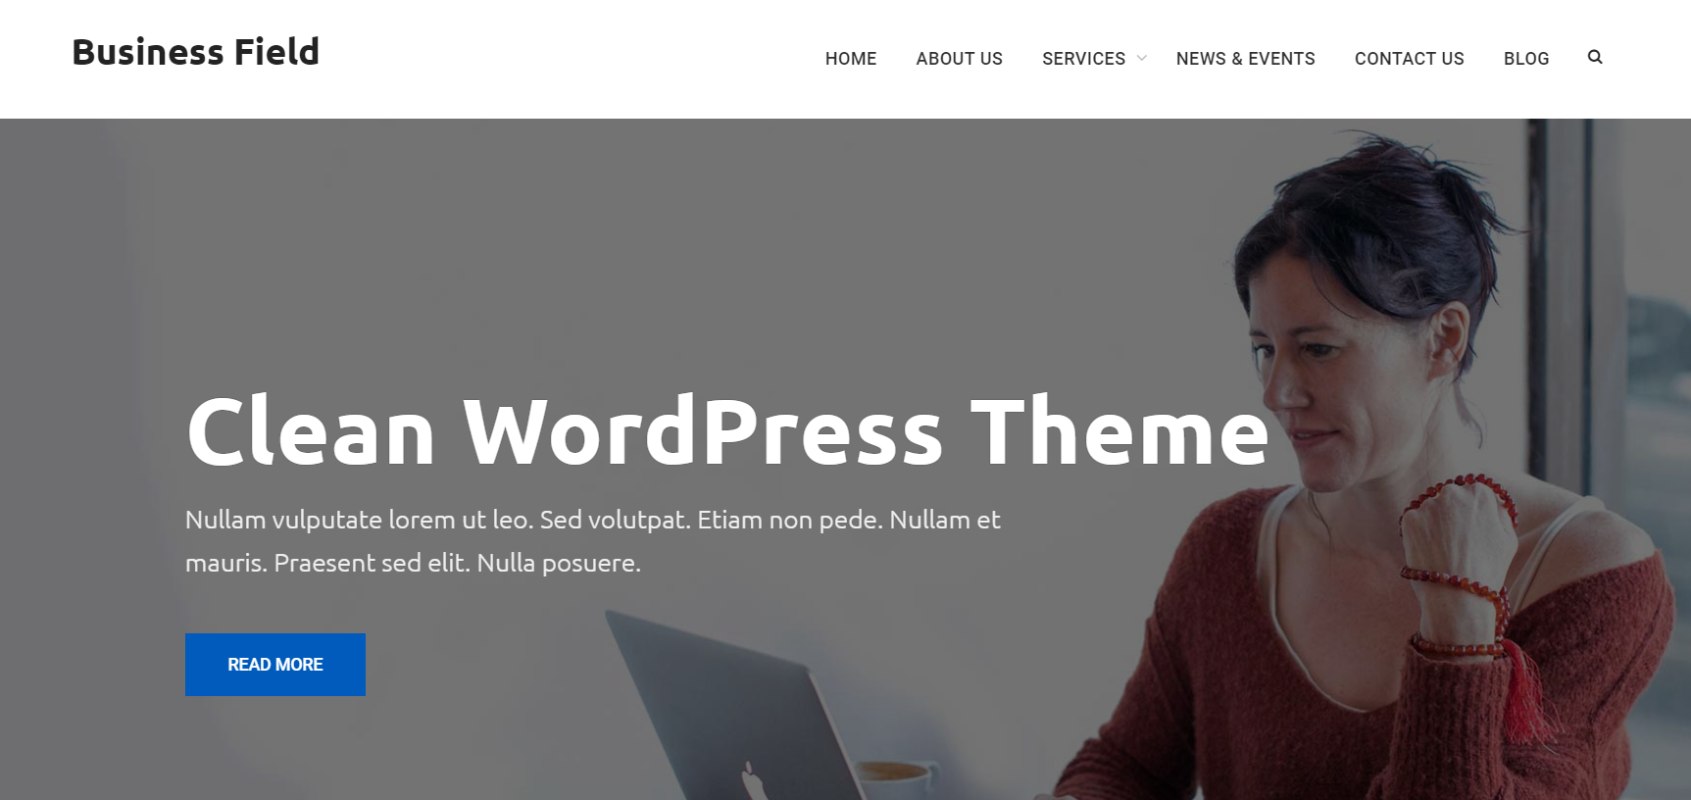 Business Field WP Theme